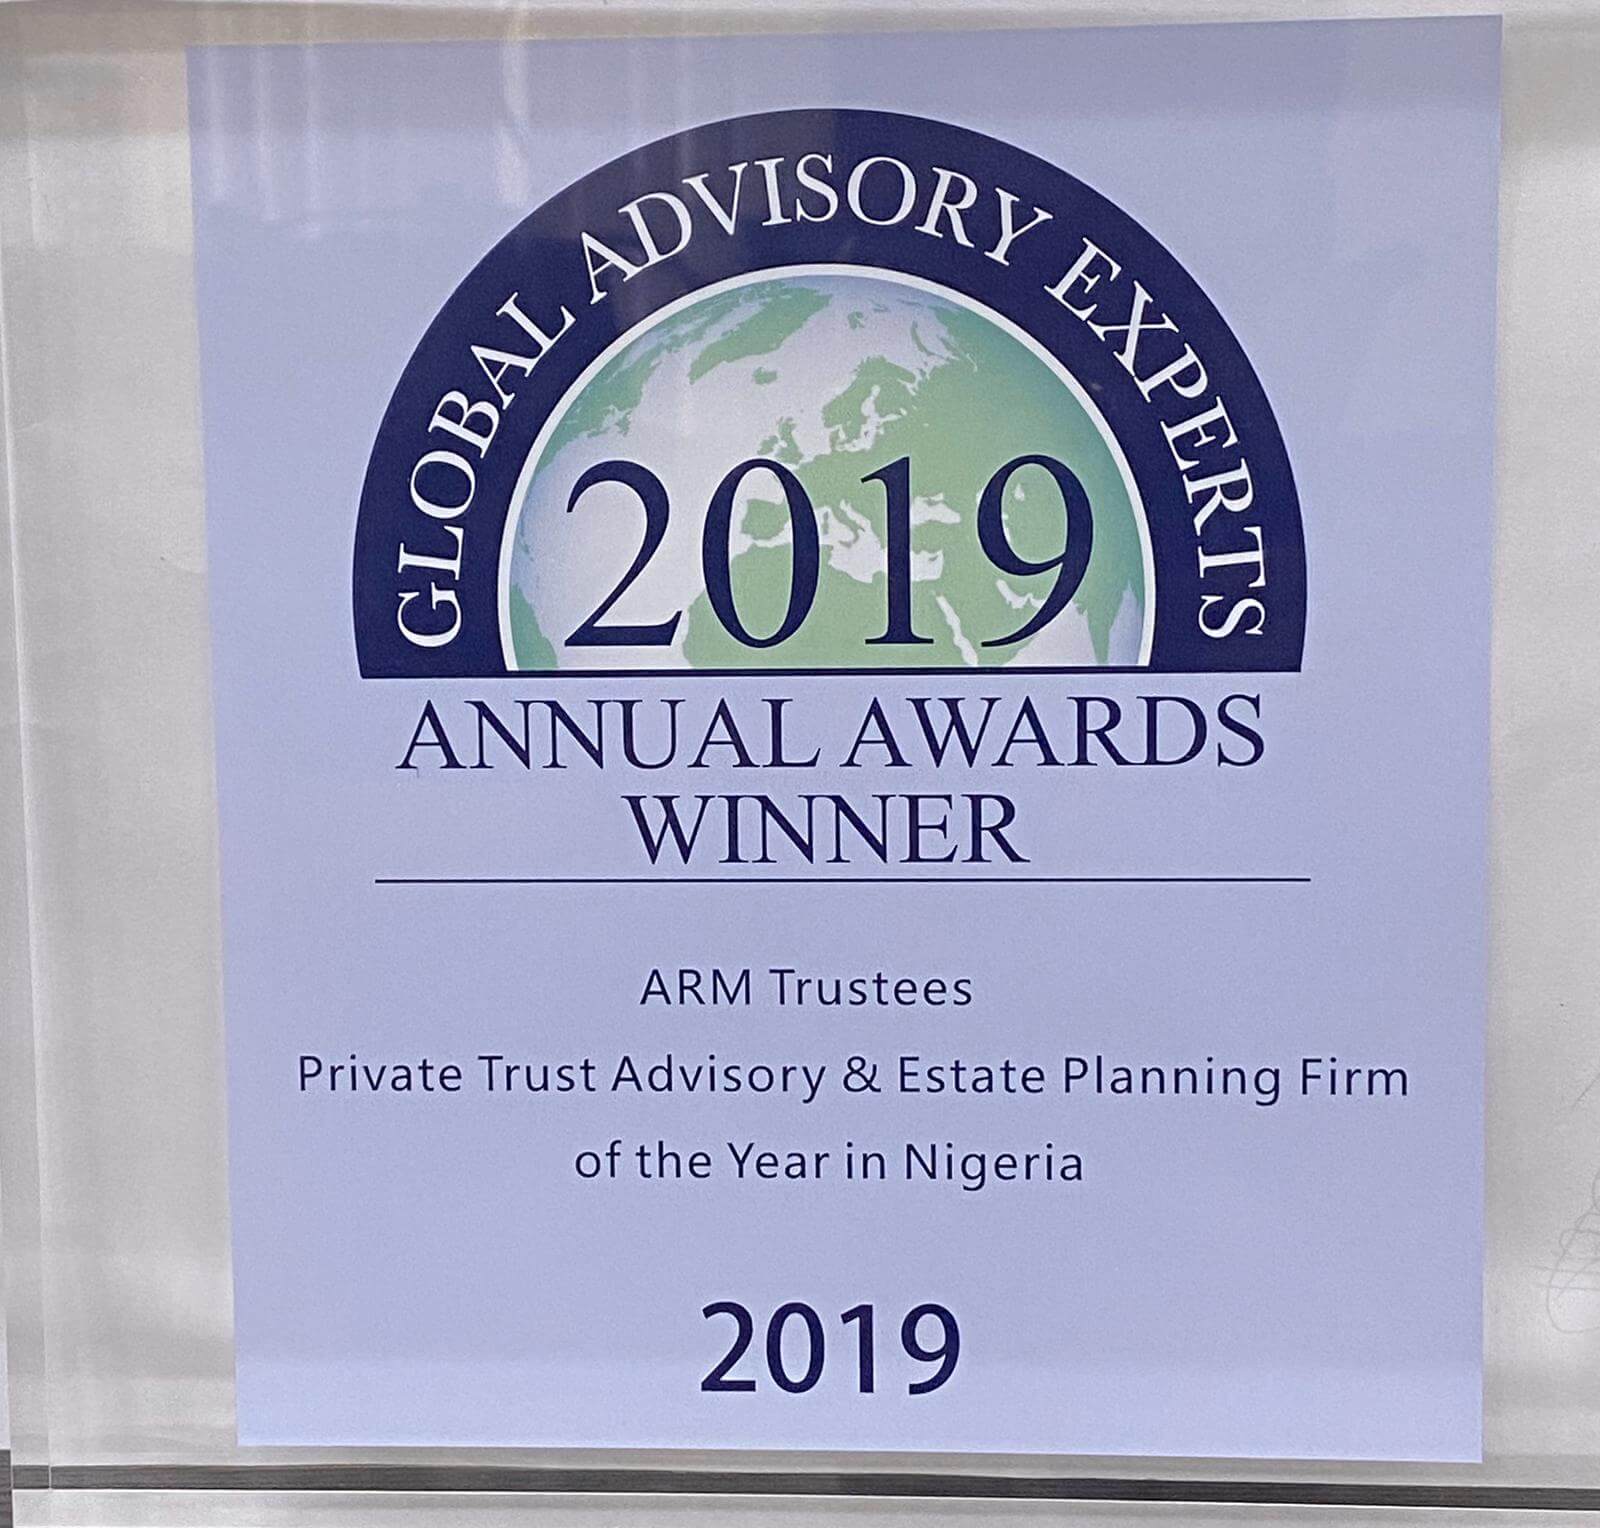 ARM Trustees bags international award for Private Trust